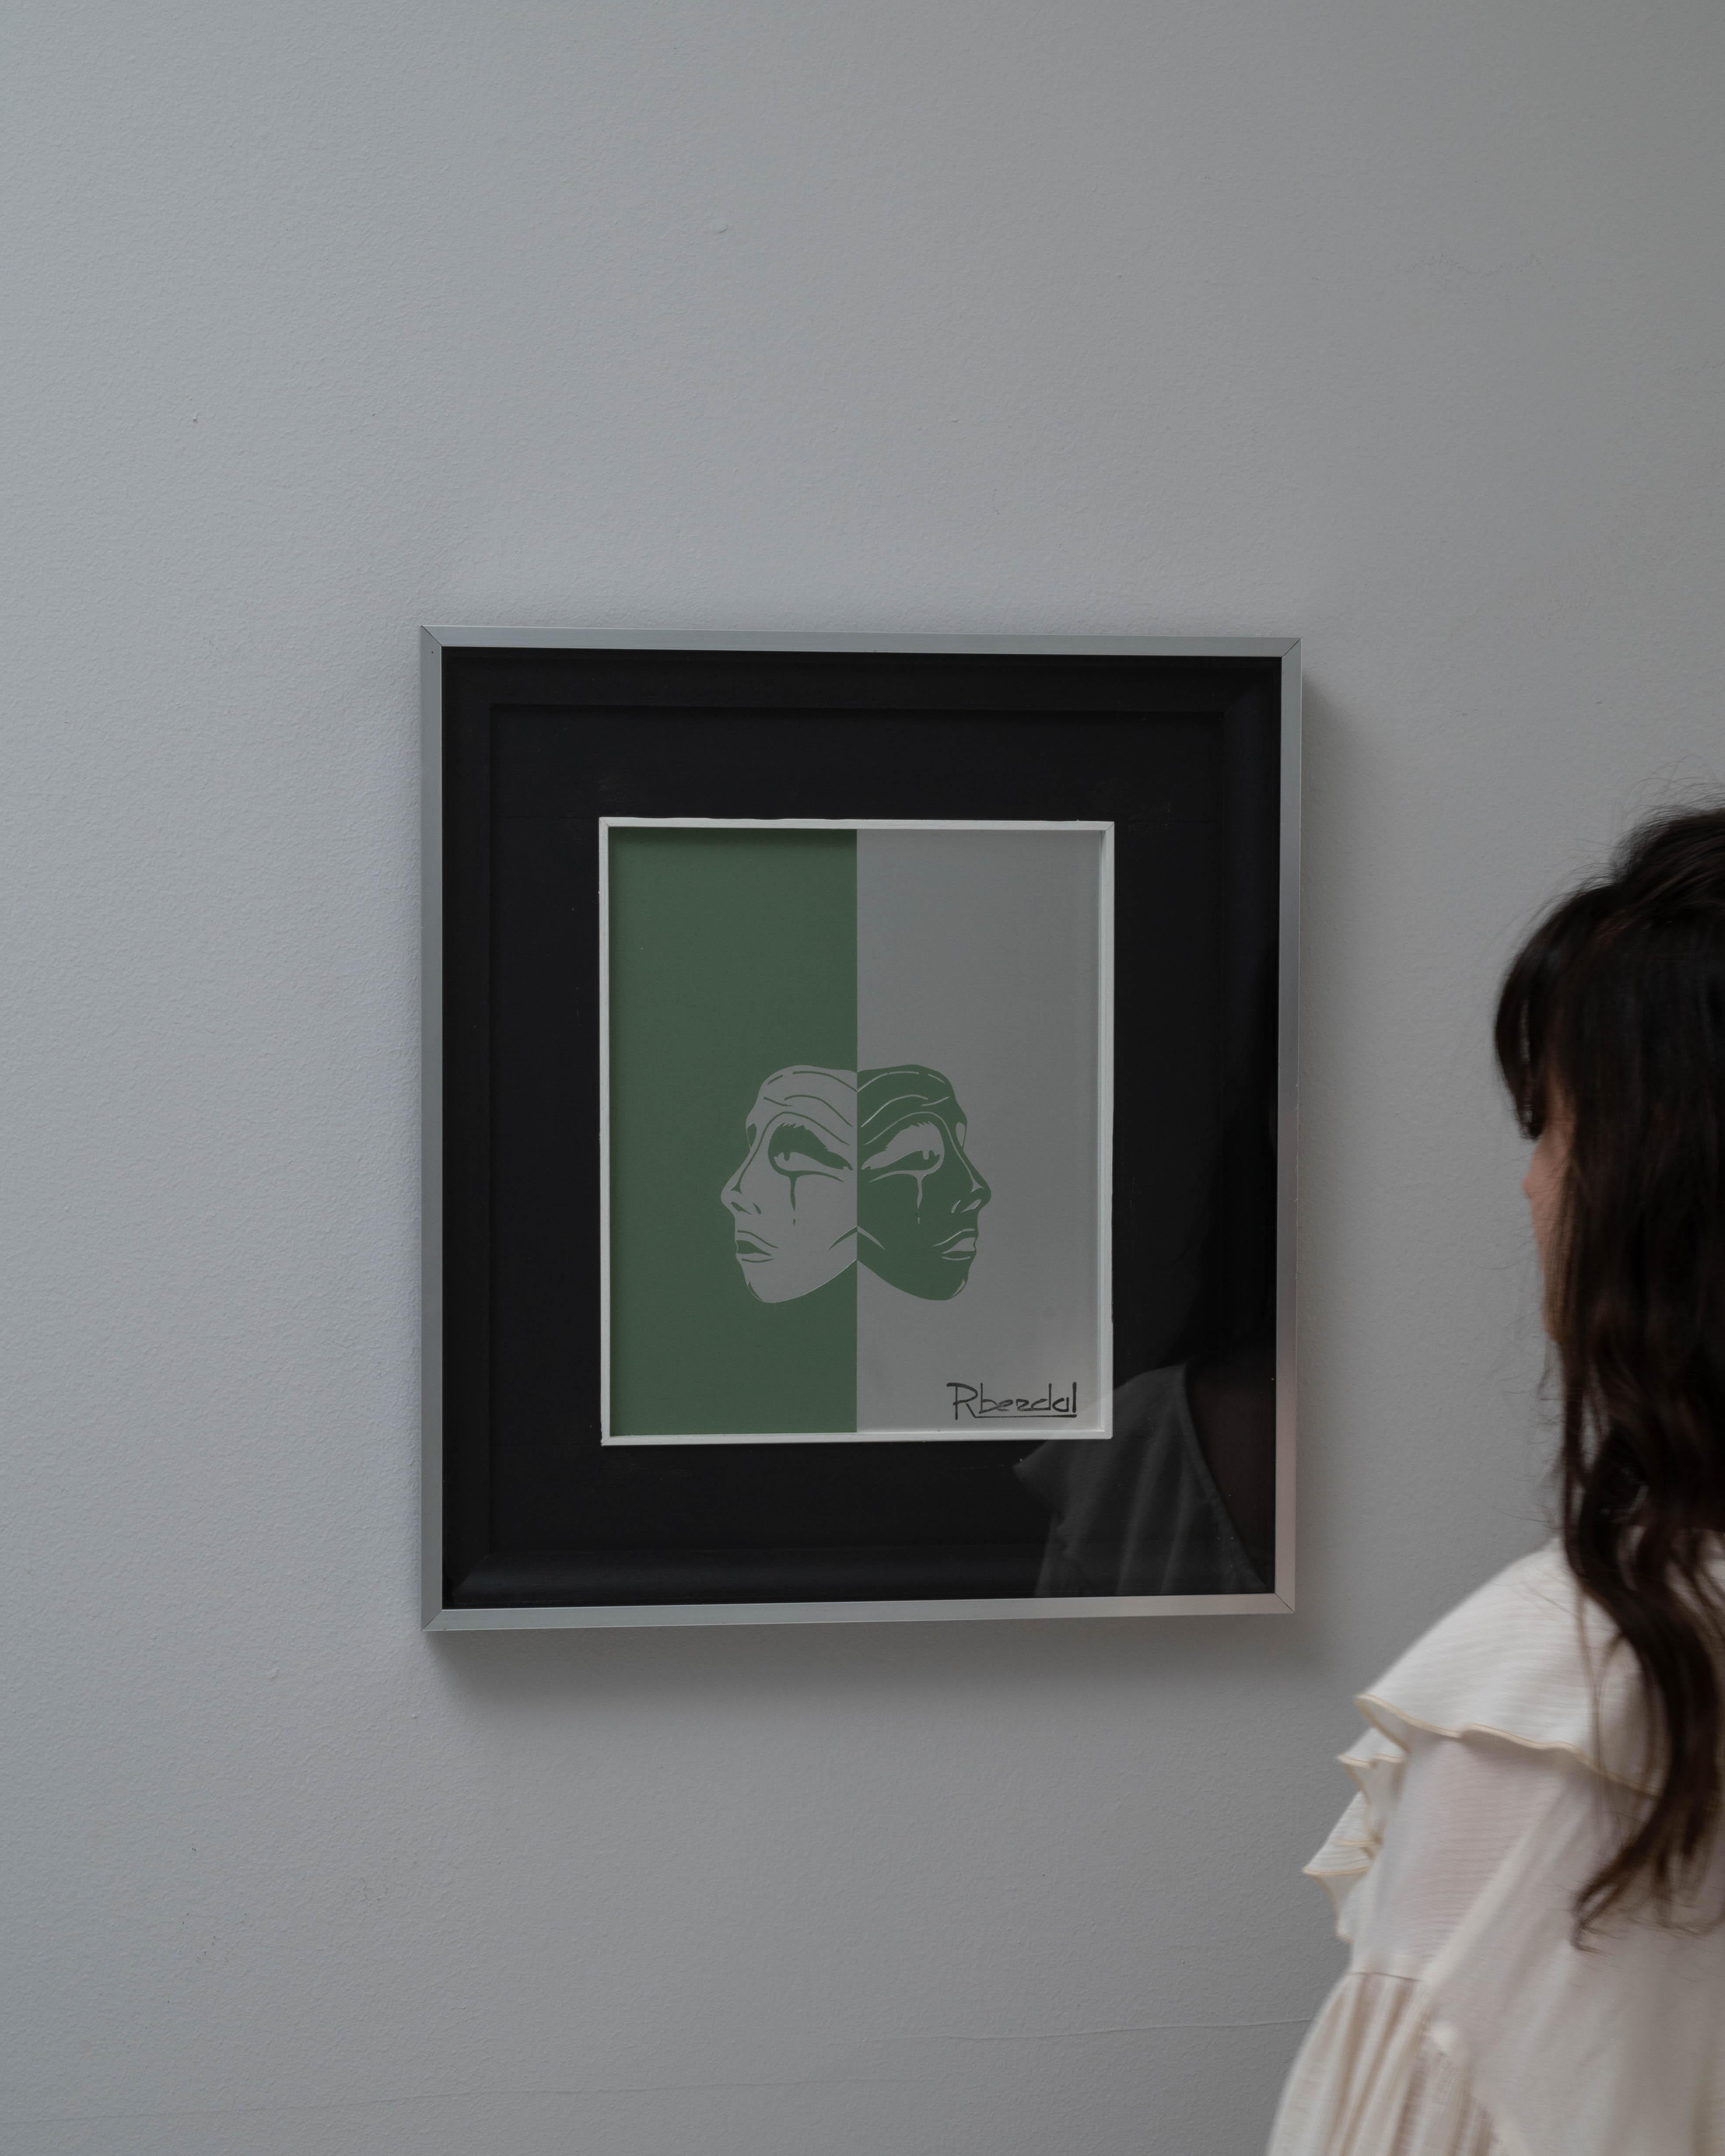 Explore the elegance and simplicity of 20th Century Belgian art with this serene piece by René Berdal. Presented in a sleek black frame, this artwork features a dual-faced portrait set against a tranquil green background, symbolizing the duality of